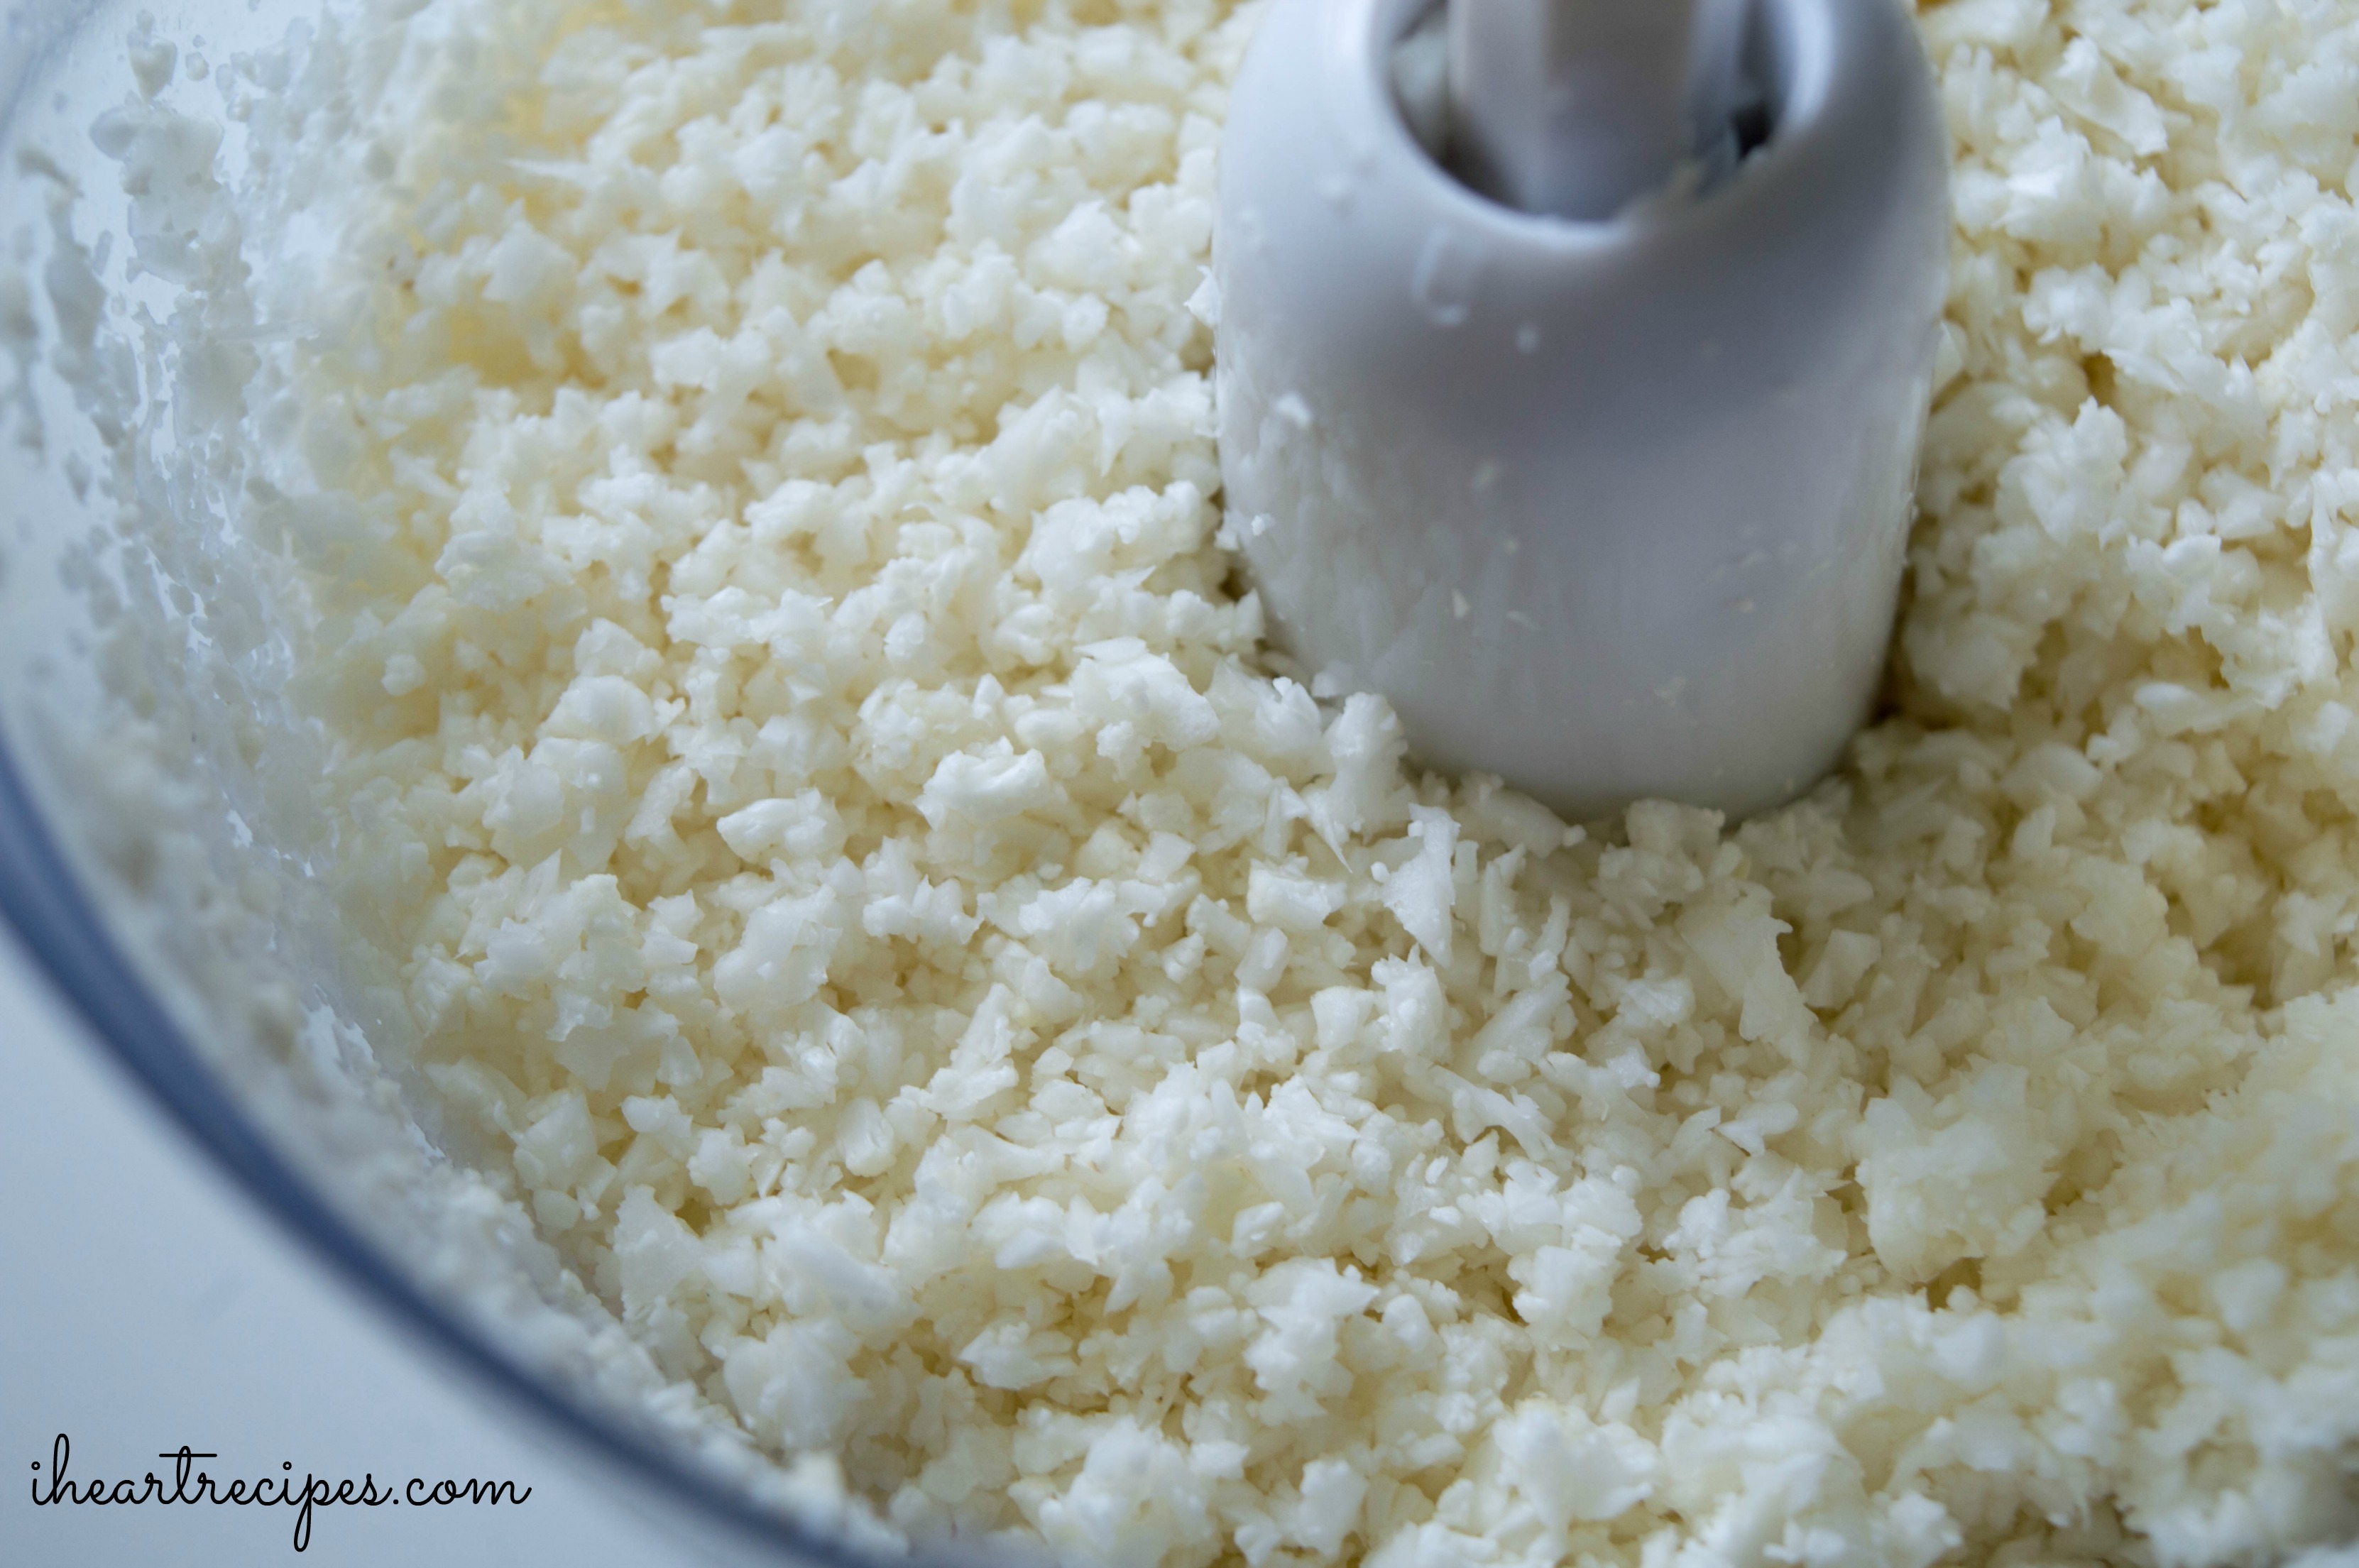 Riced cauliflower is made by tossing a head of rice into a food processor and pulsing it.